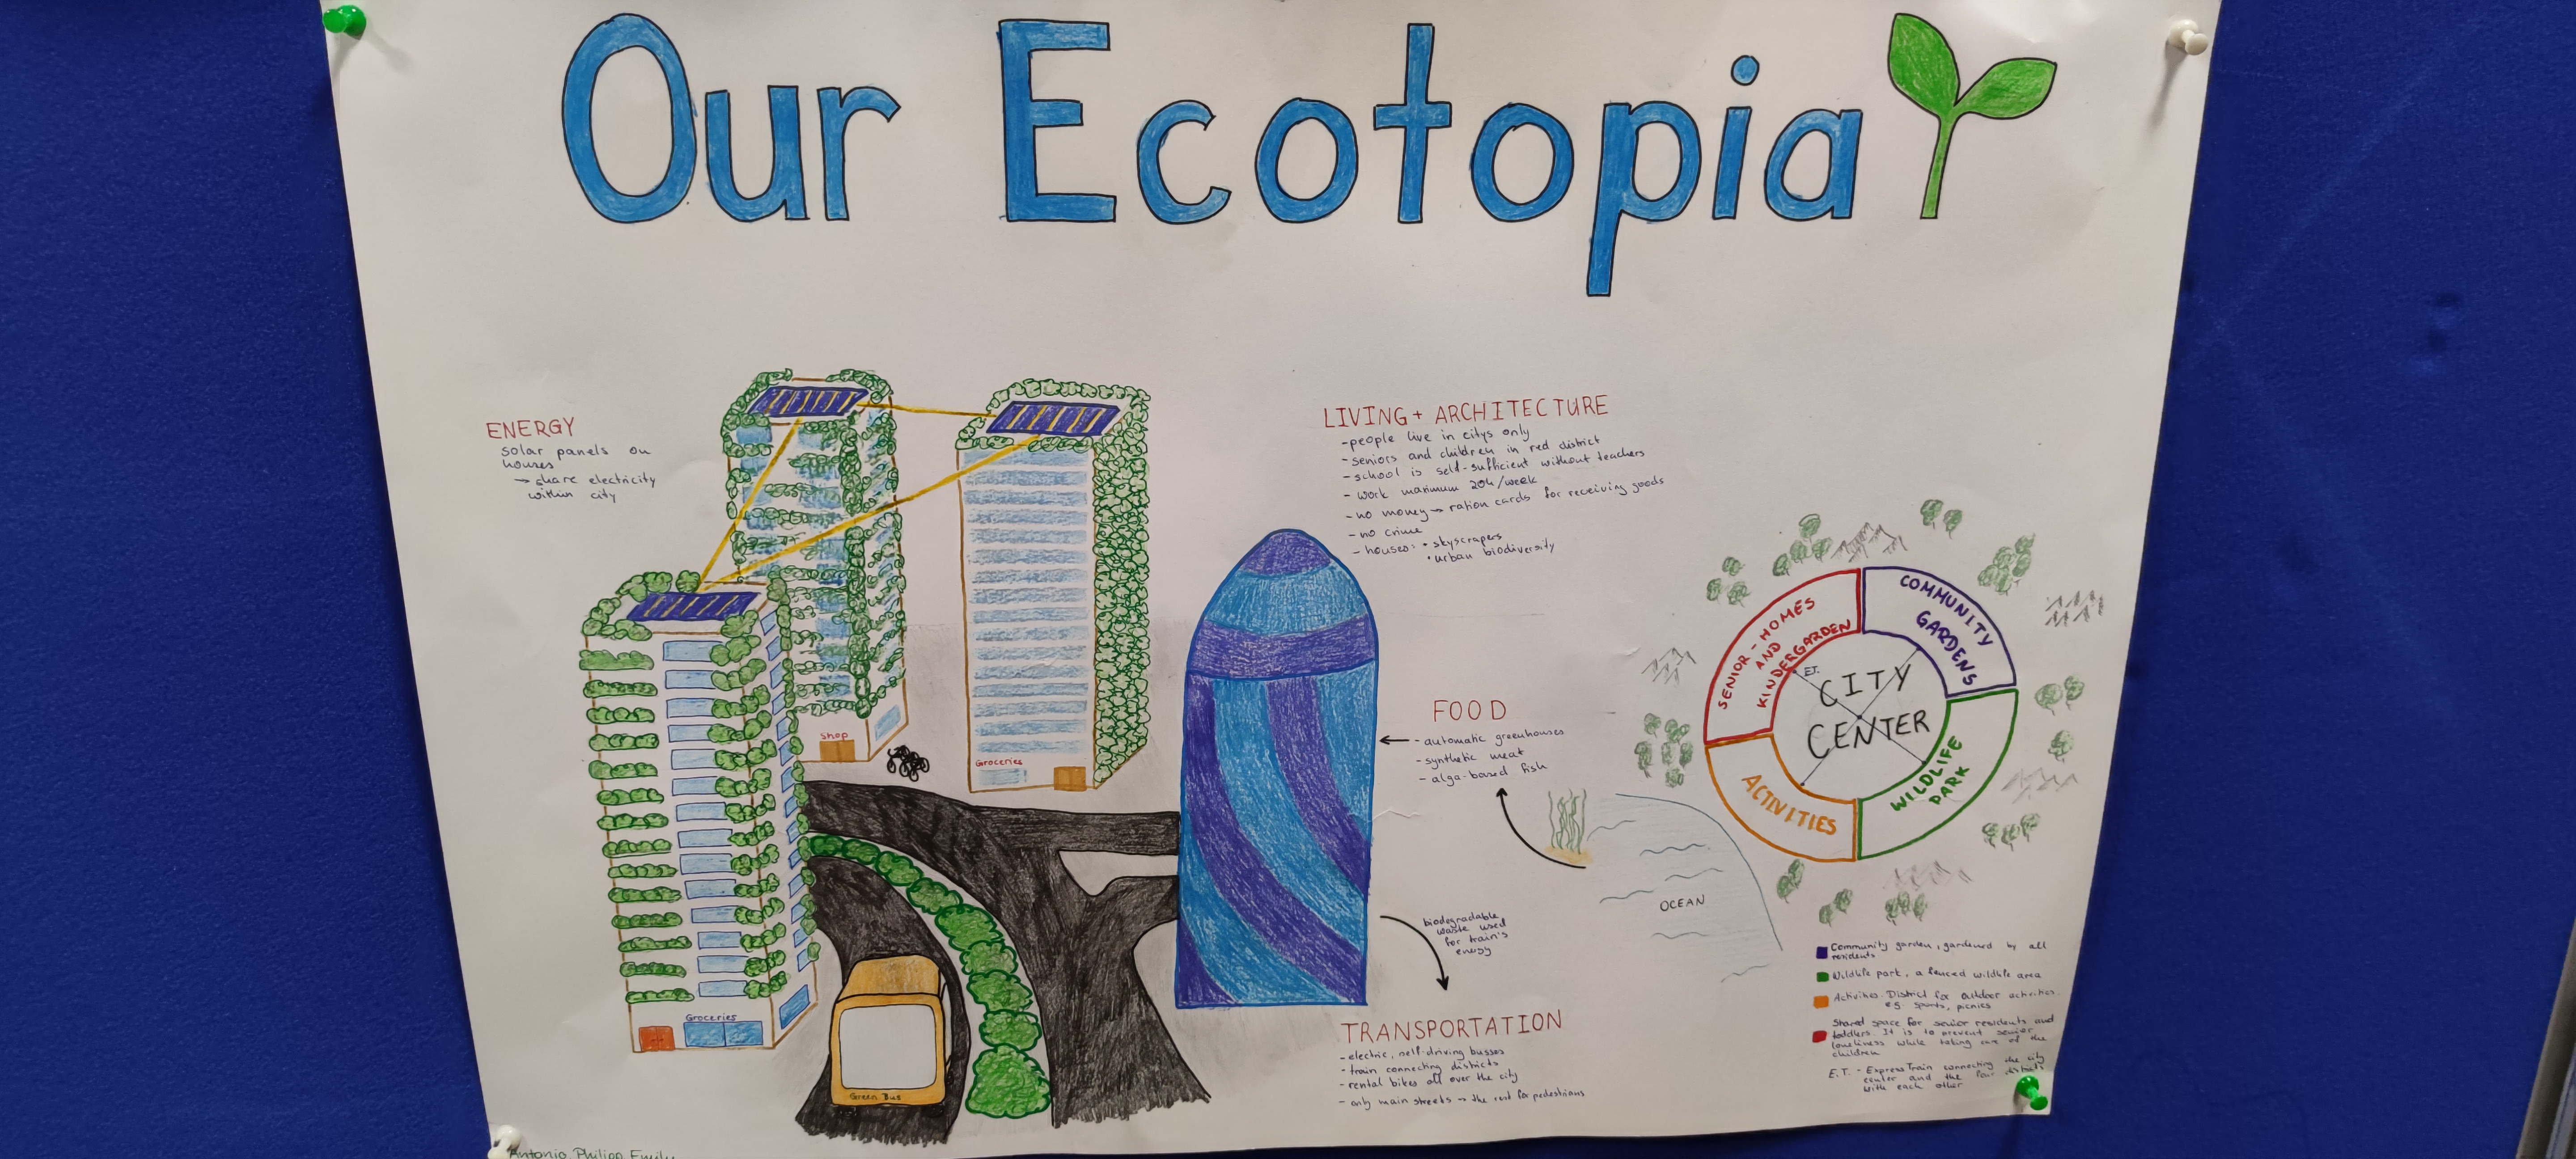 poster inspired by the novel "Ecotopia" by Ernest Callenbach (1975) - advanced course year 12